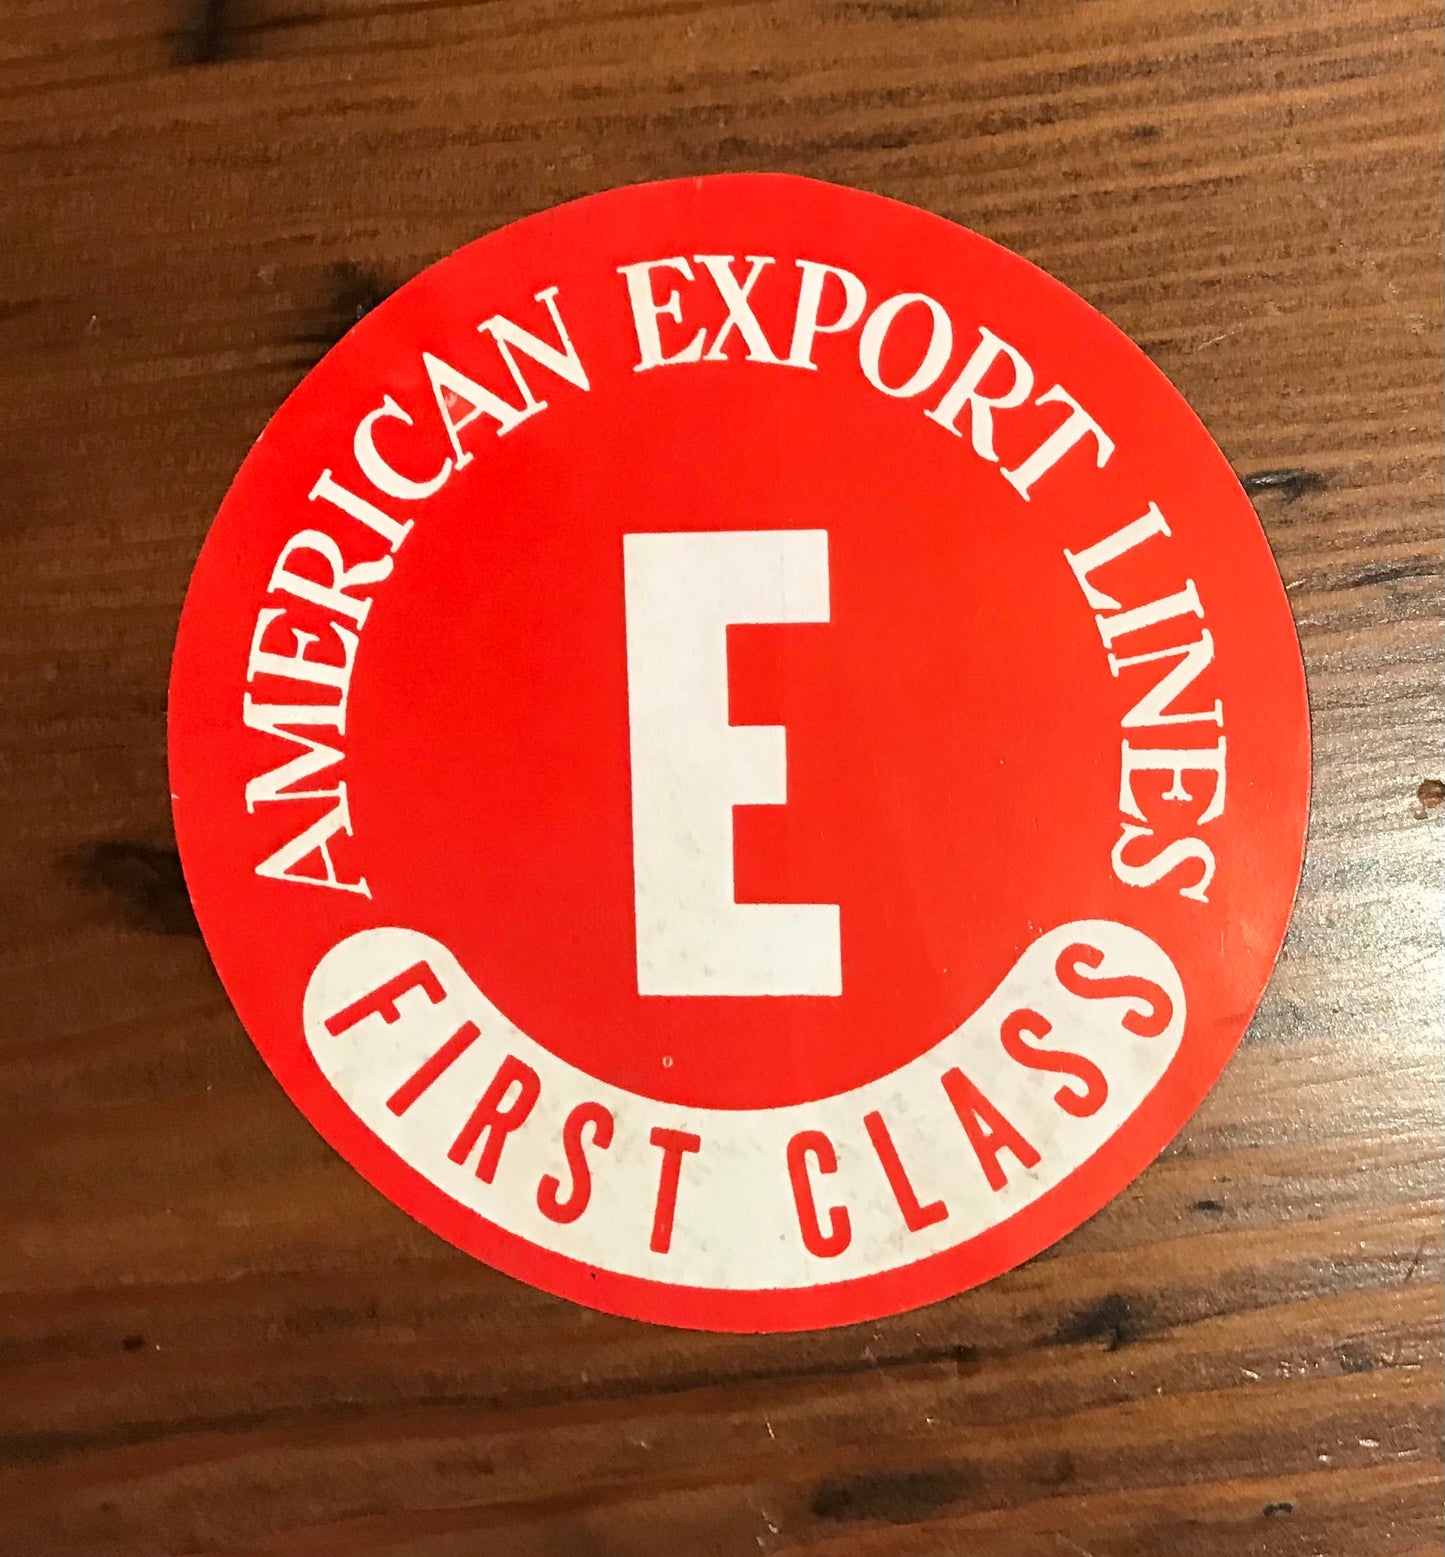 Stickers - American Export Lines First Class, assorted letters